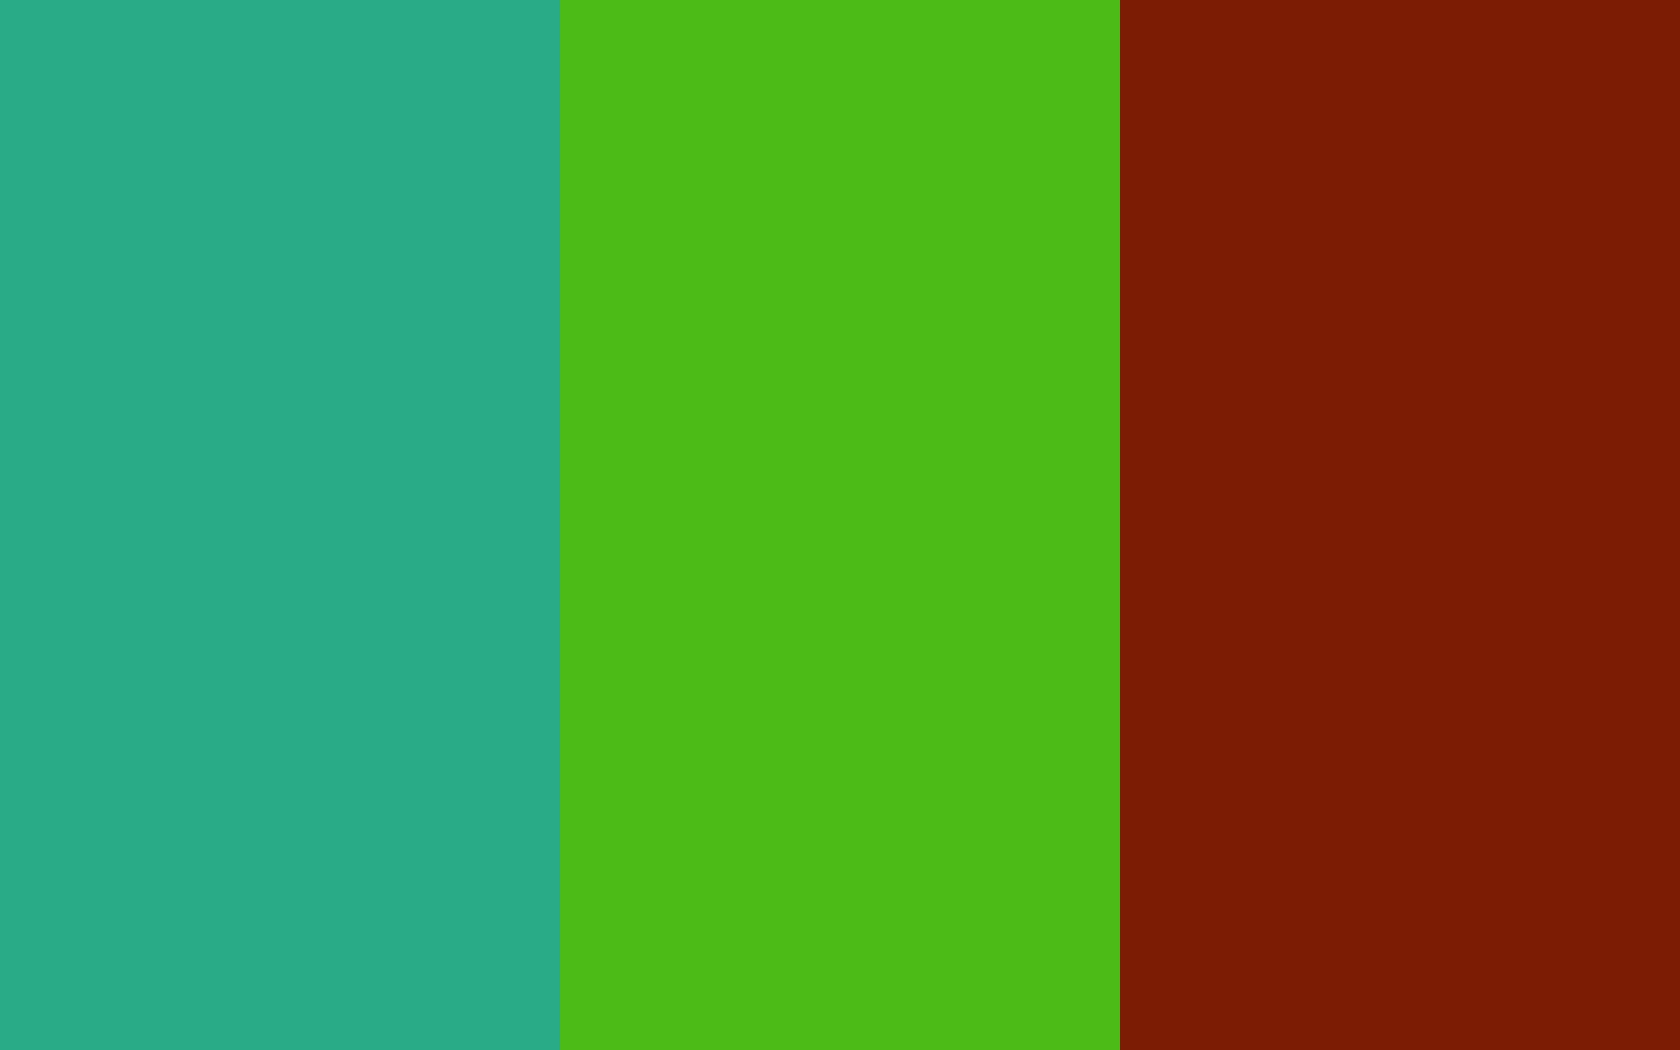 Free 1680x1050 resolution Jungle Green Kelly Green and Kenyan Copper